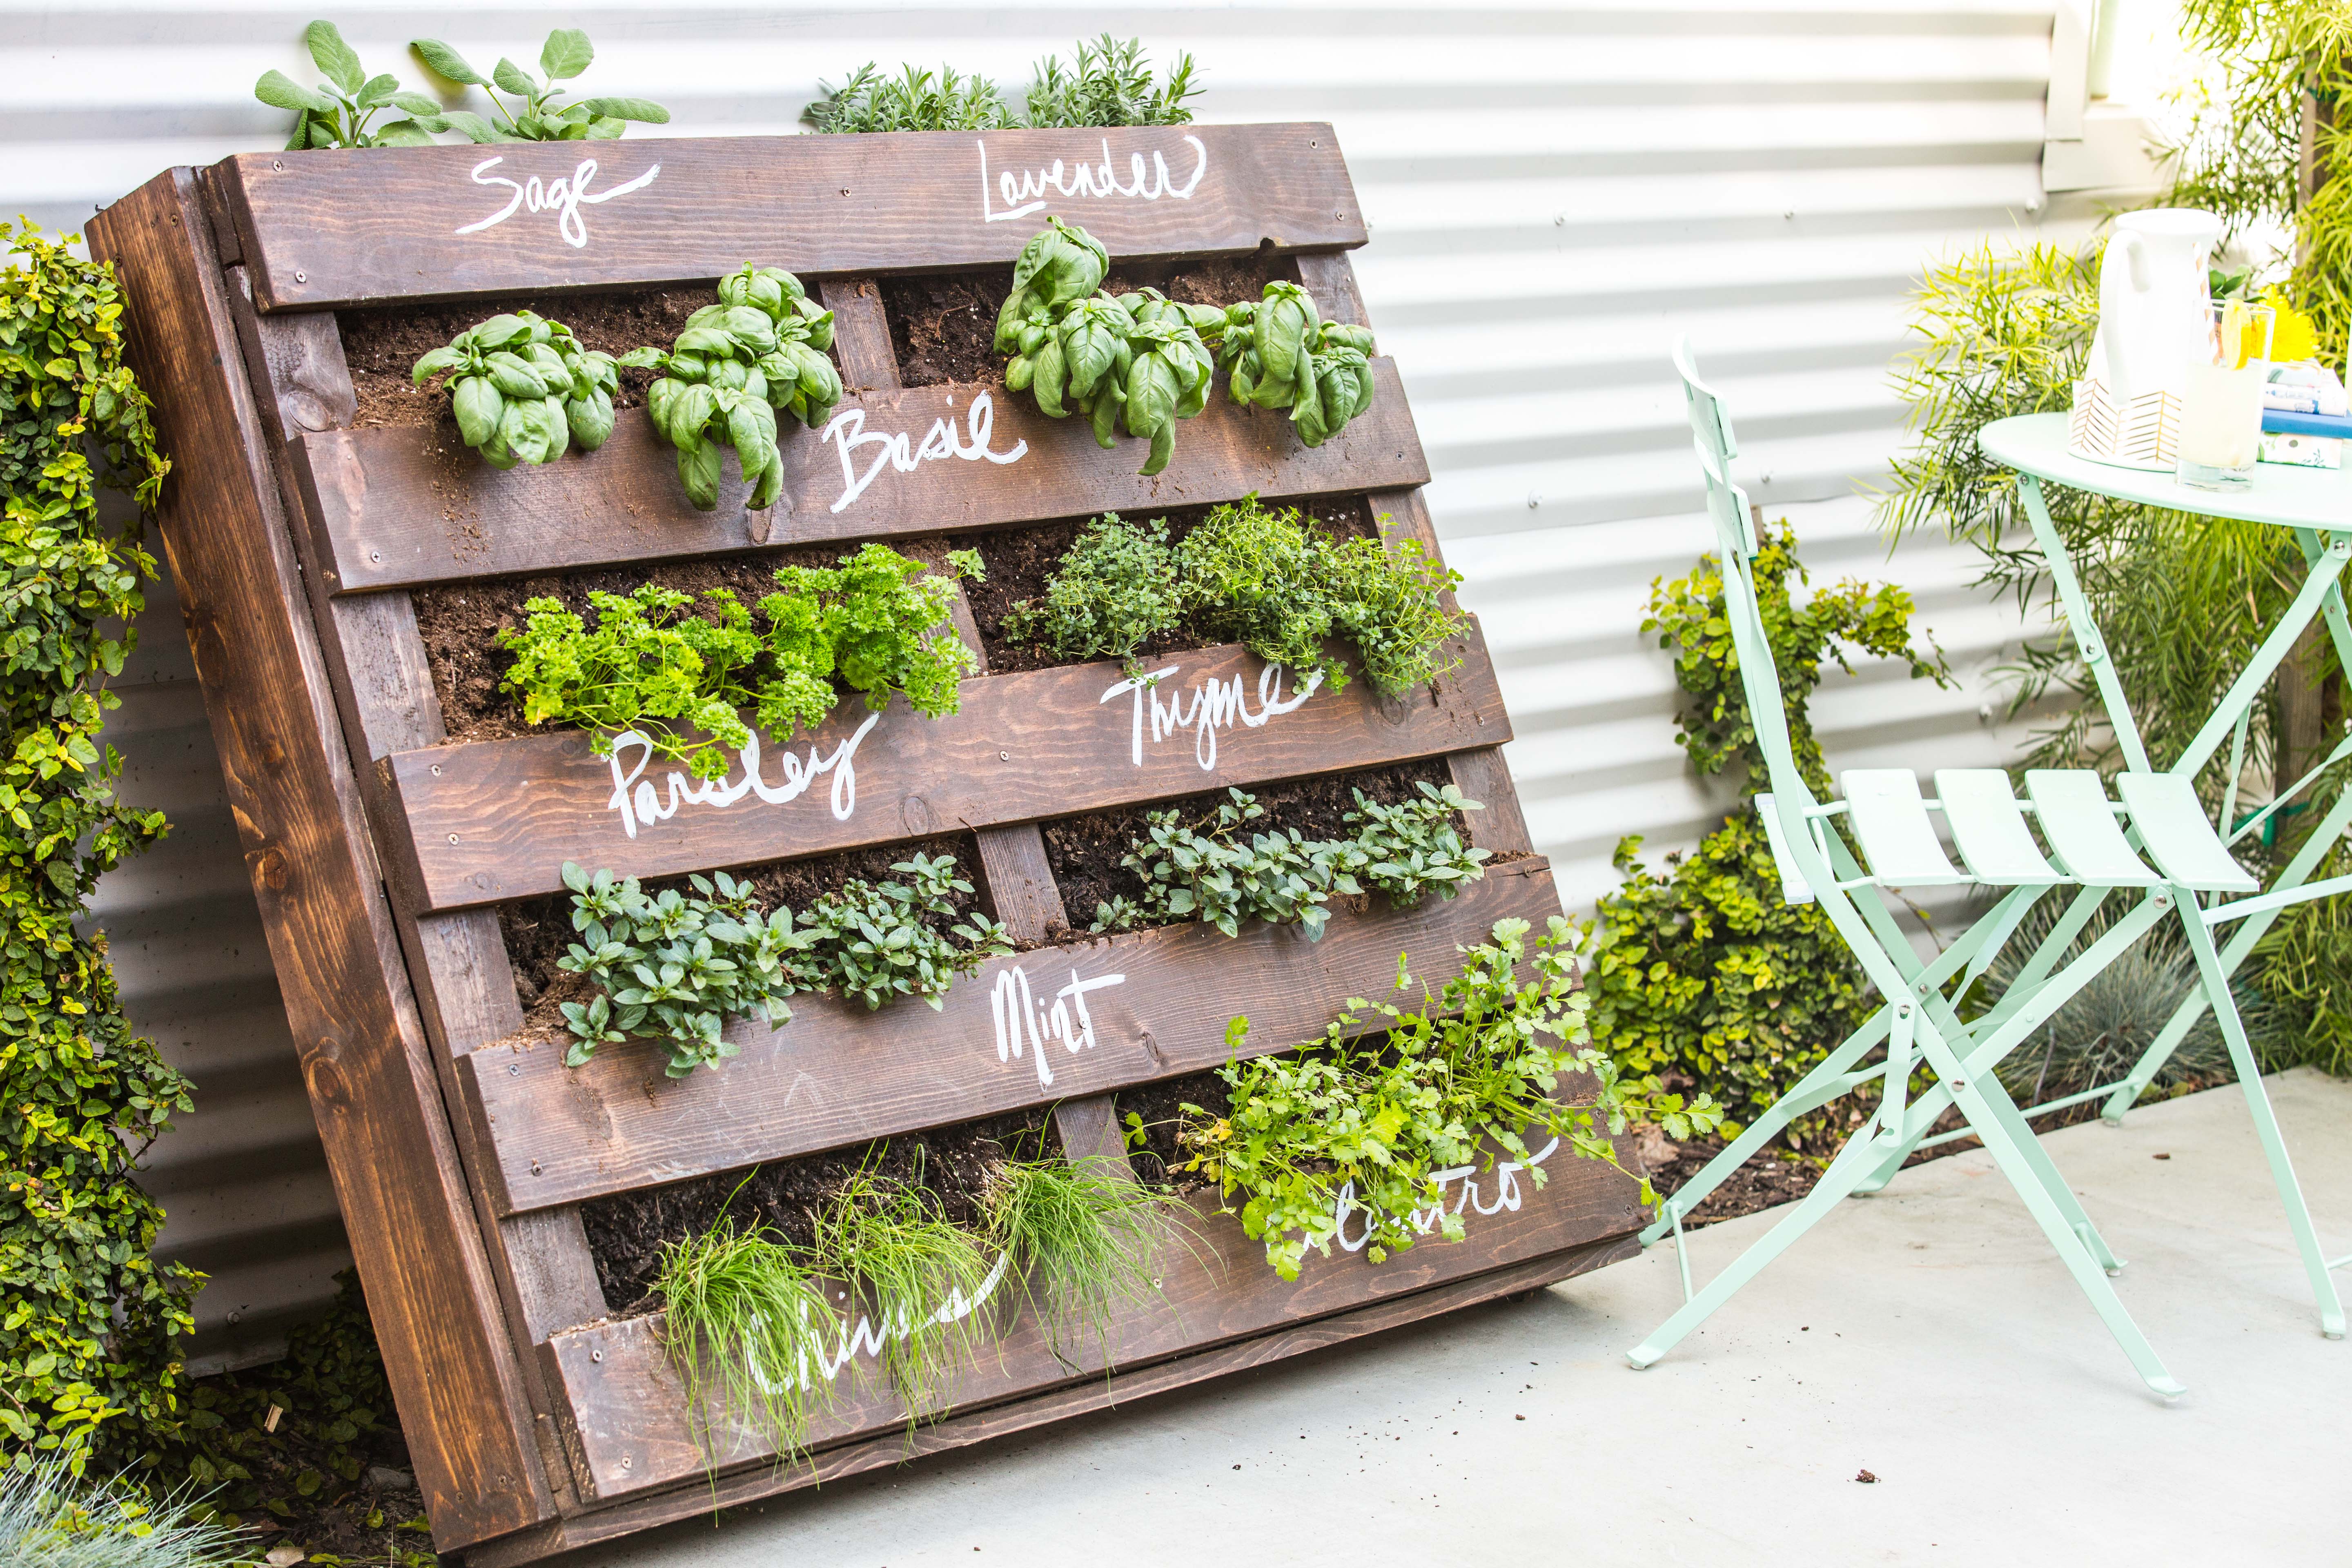 How To Make A Veggie Garden Out Of Pallets